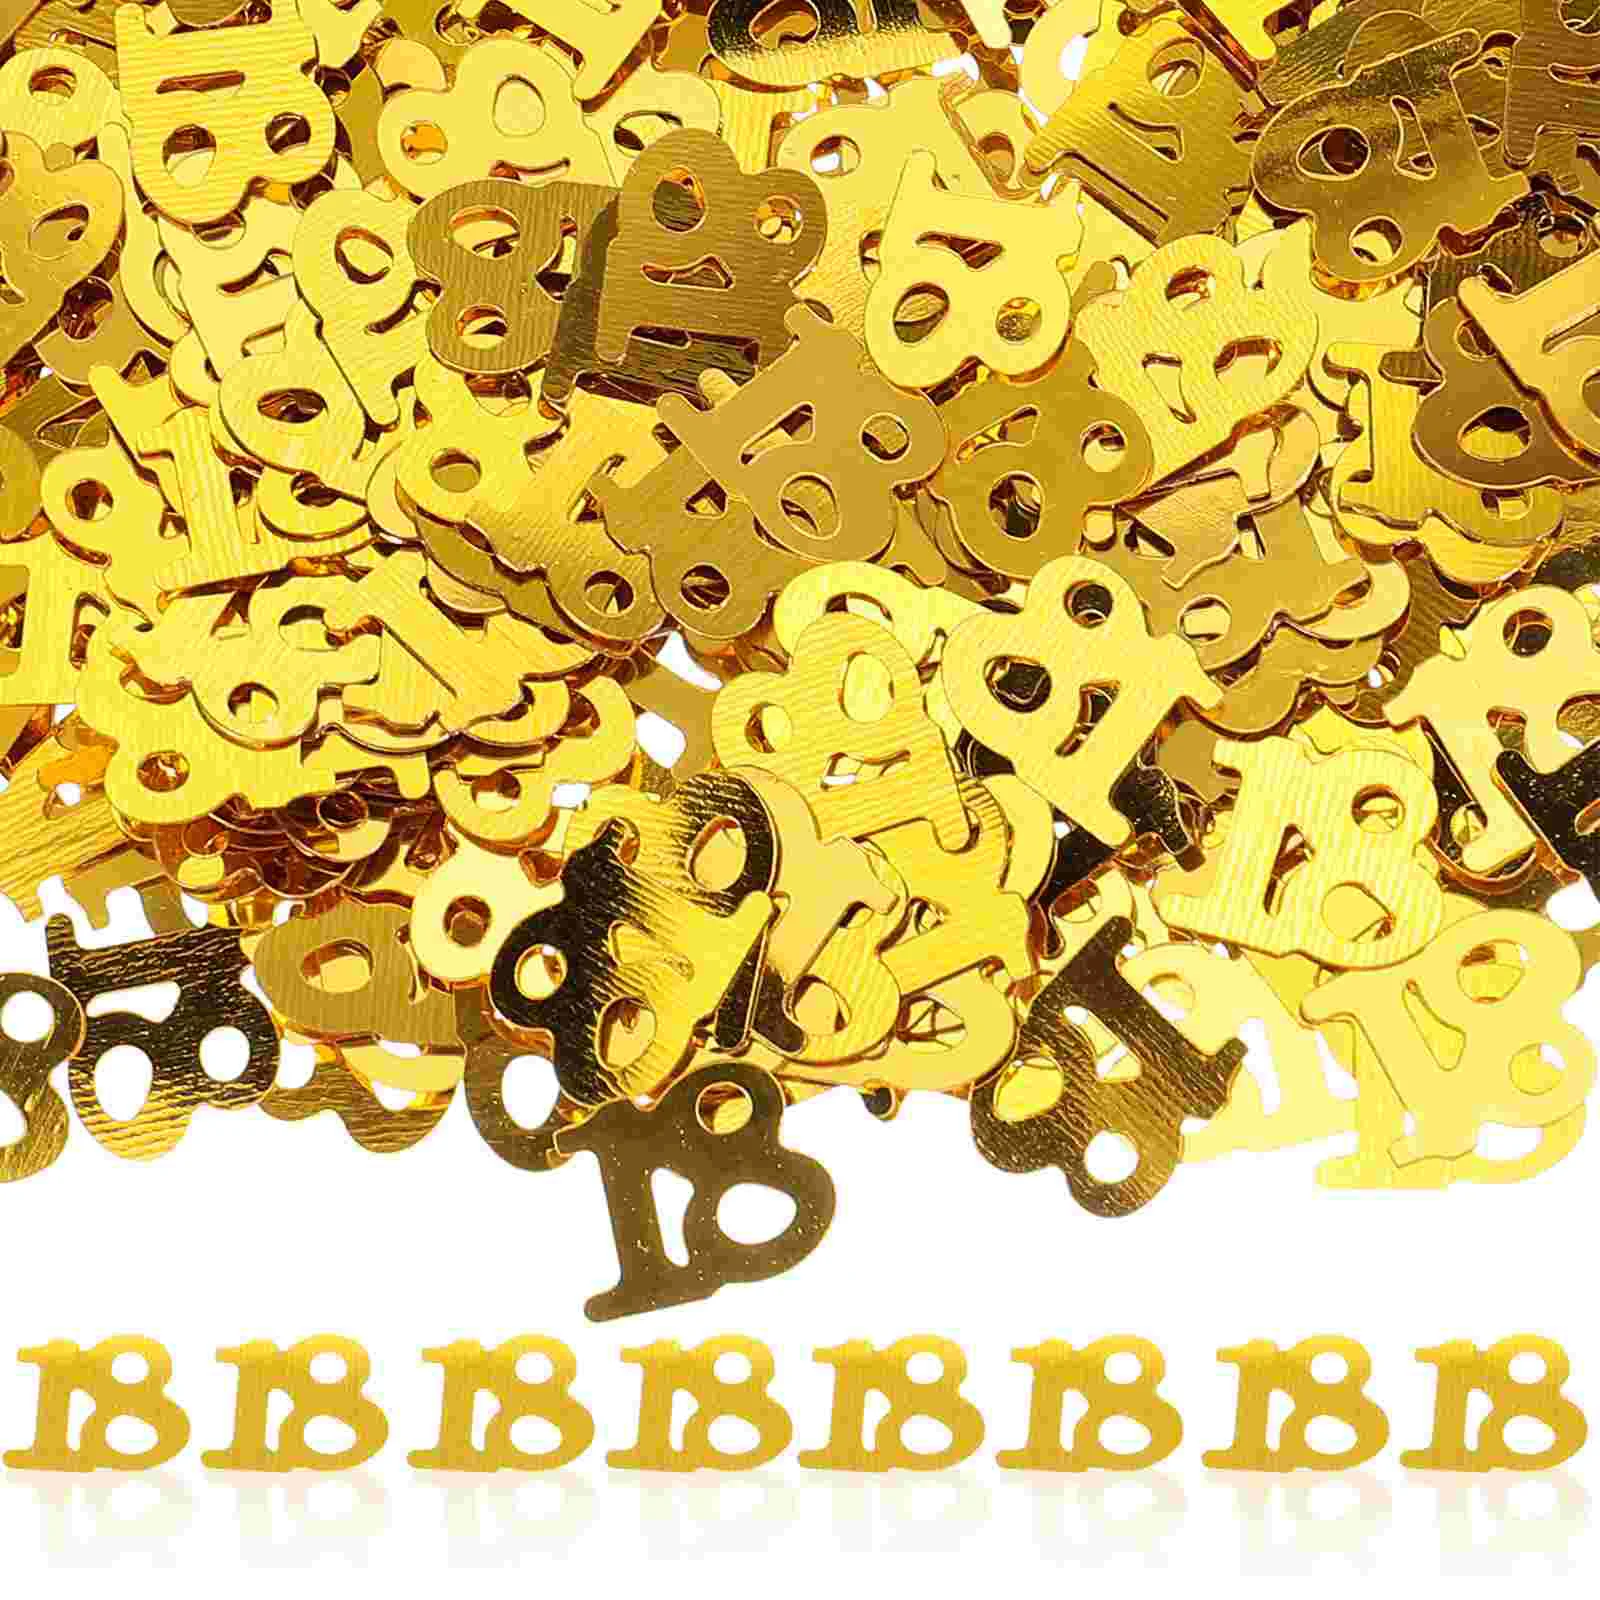 

600PC Monochrome Digital Birthday Confetti Party Happy Throwing Sequins Age 18 for Festival Party Decoration (Golden)